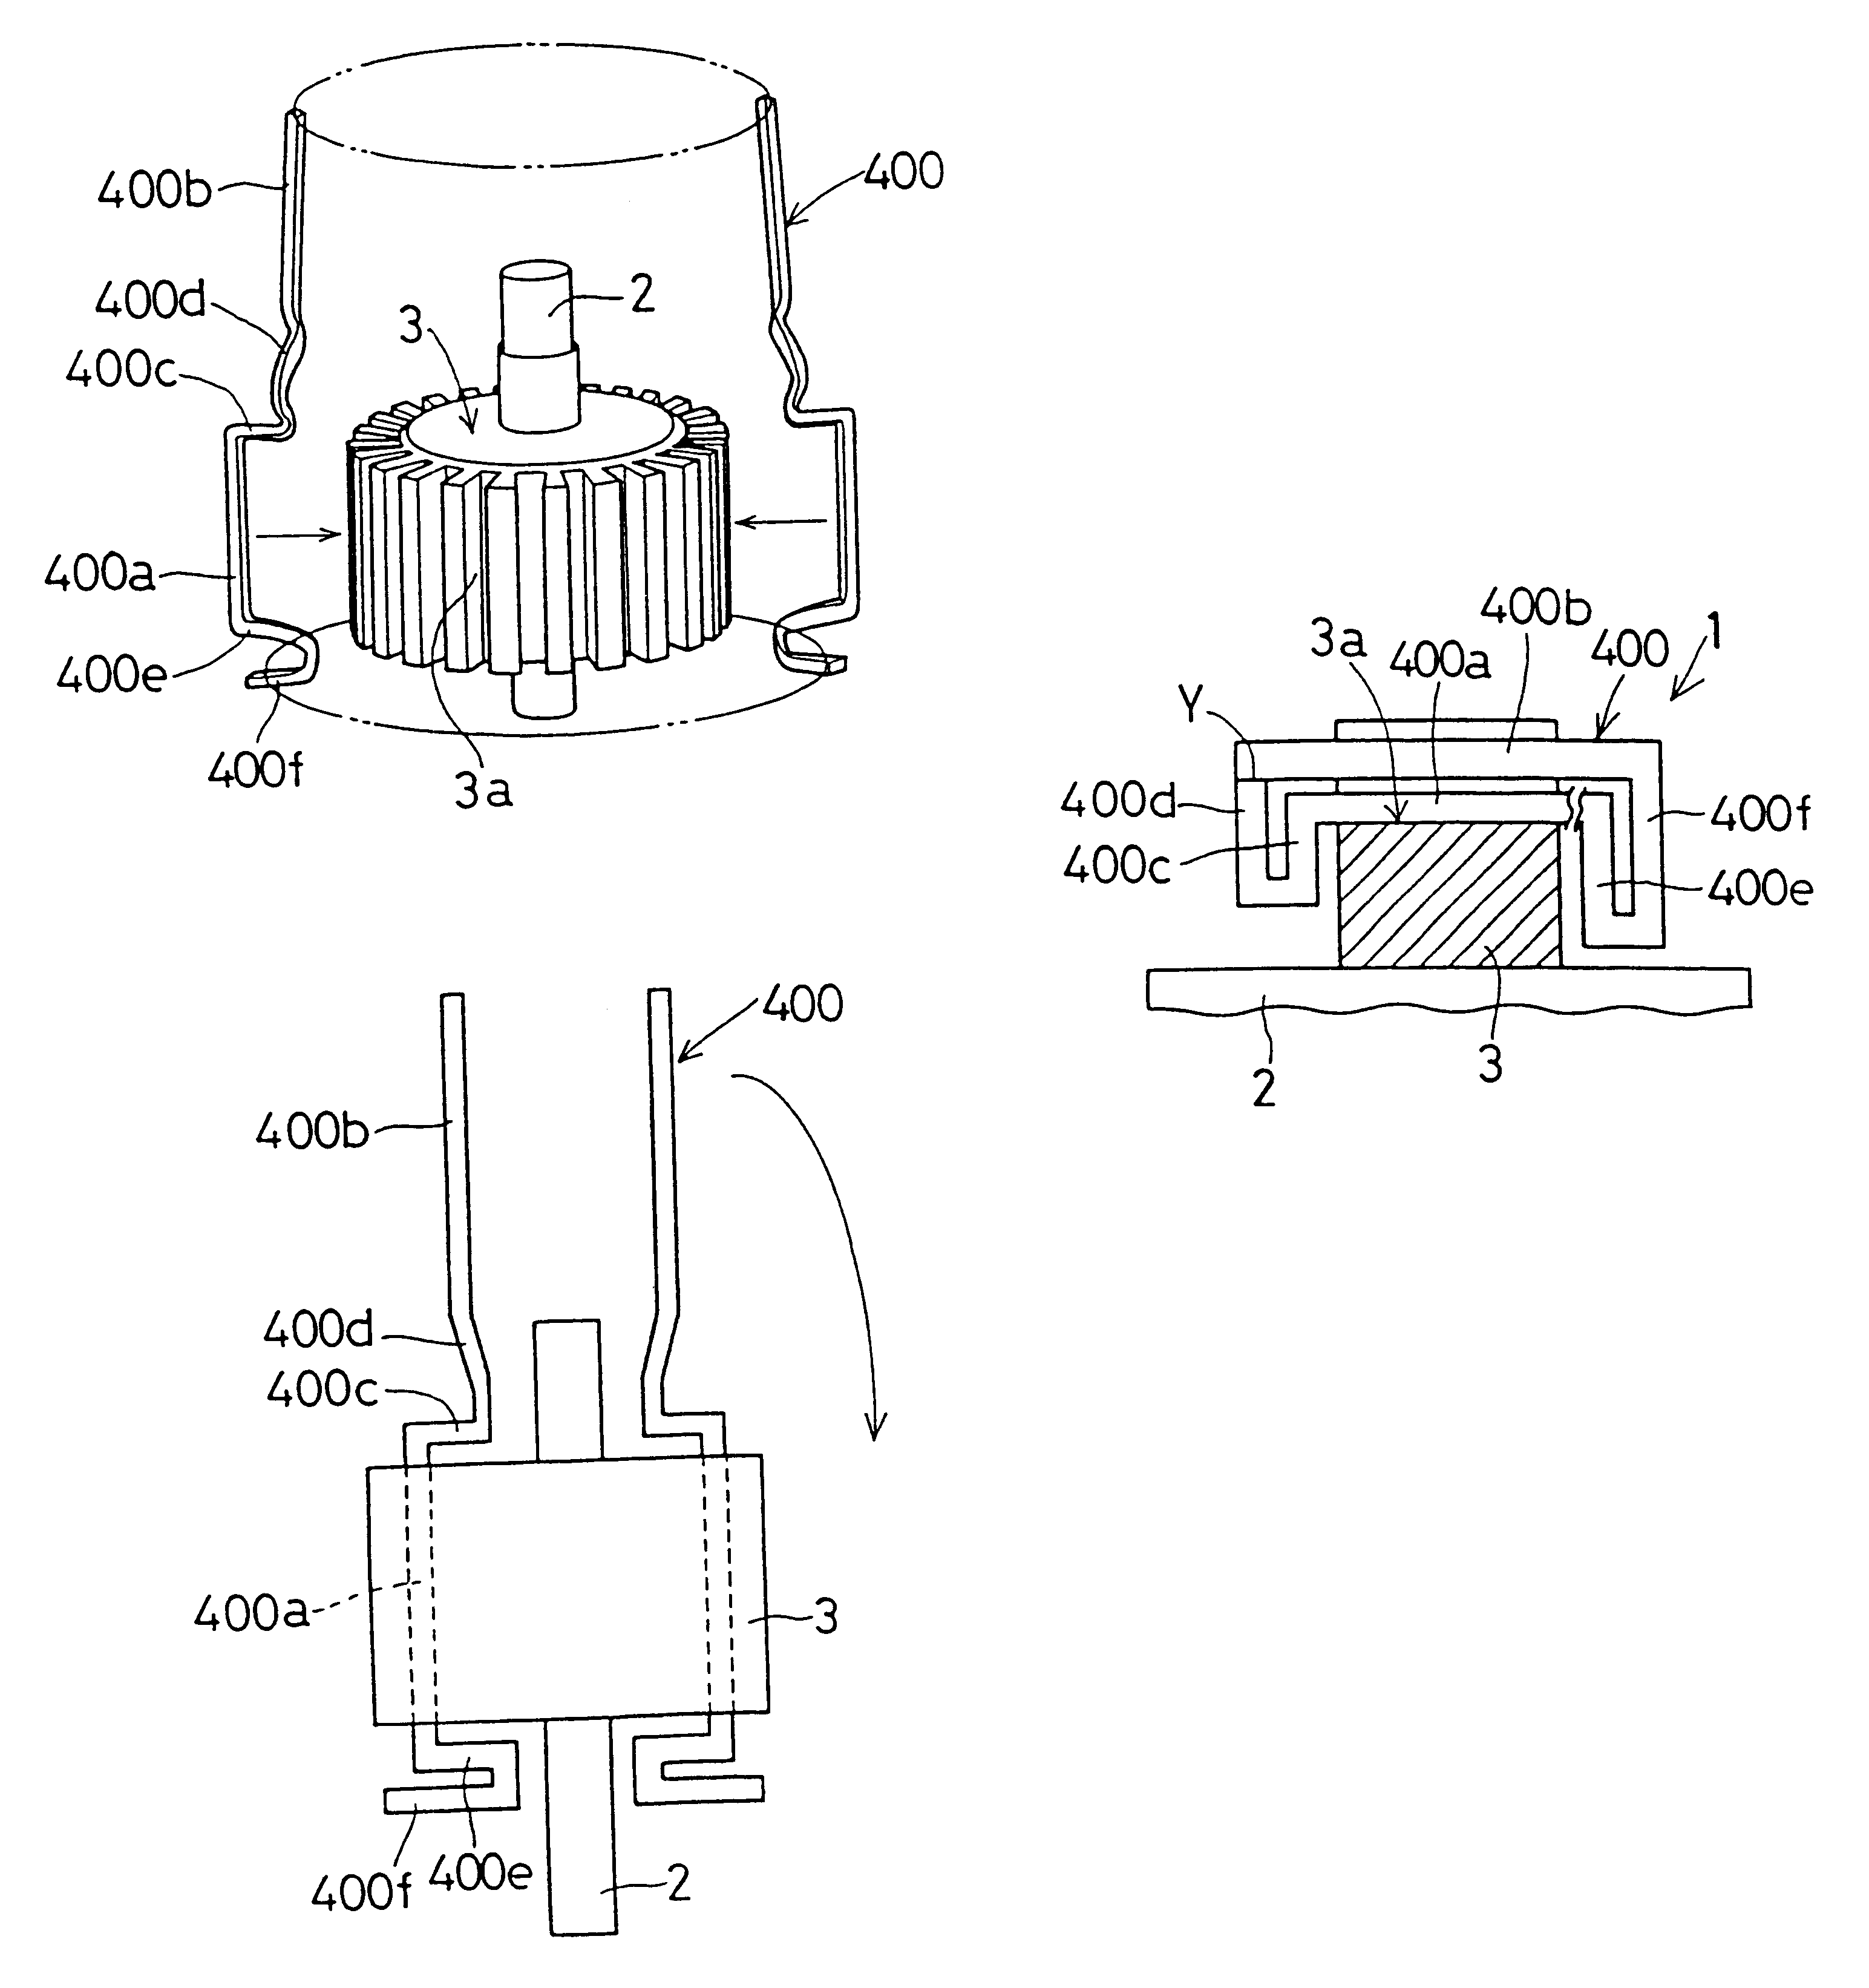 Rotor production method including assembling a slot insulator and coil trunk into a set prior to insertion into an armature core